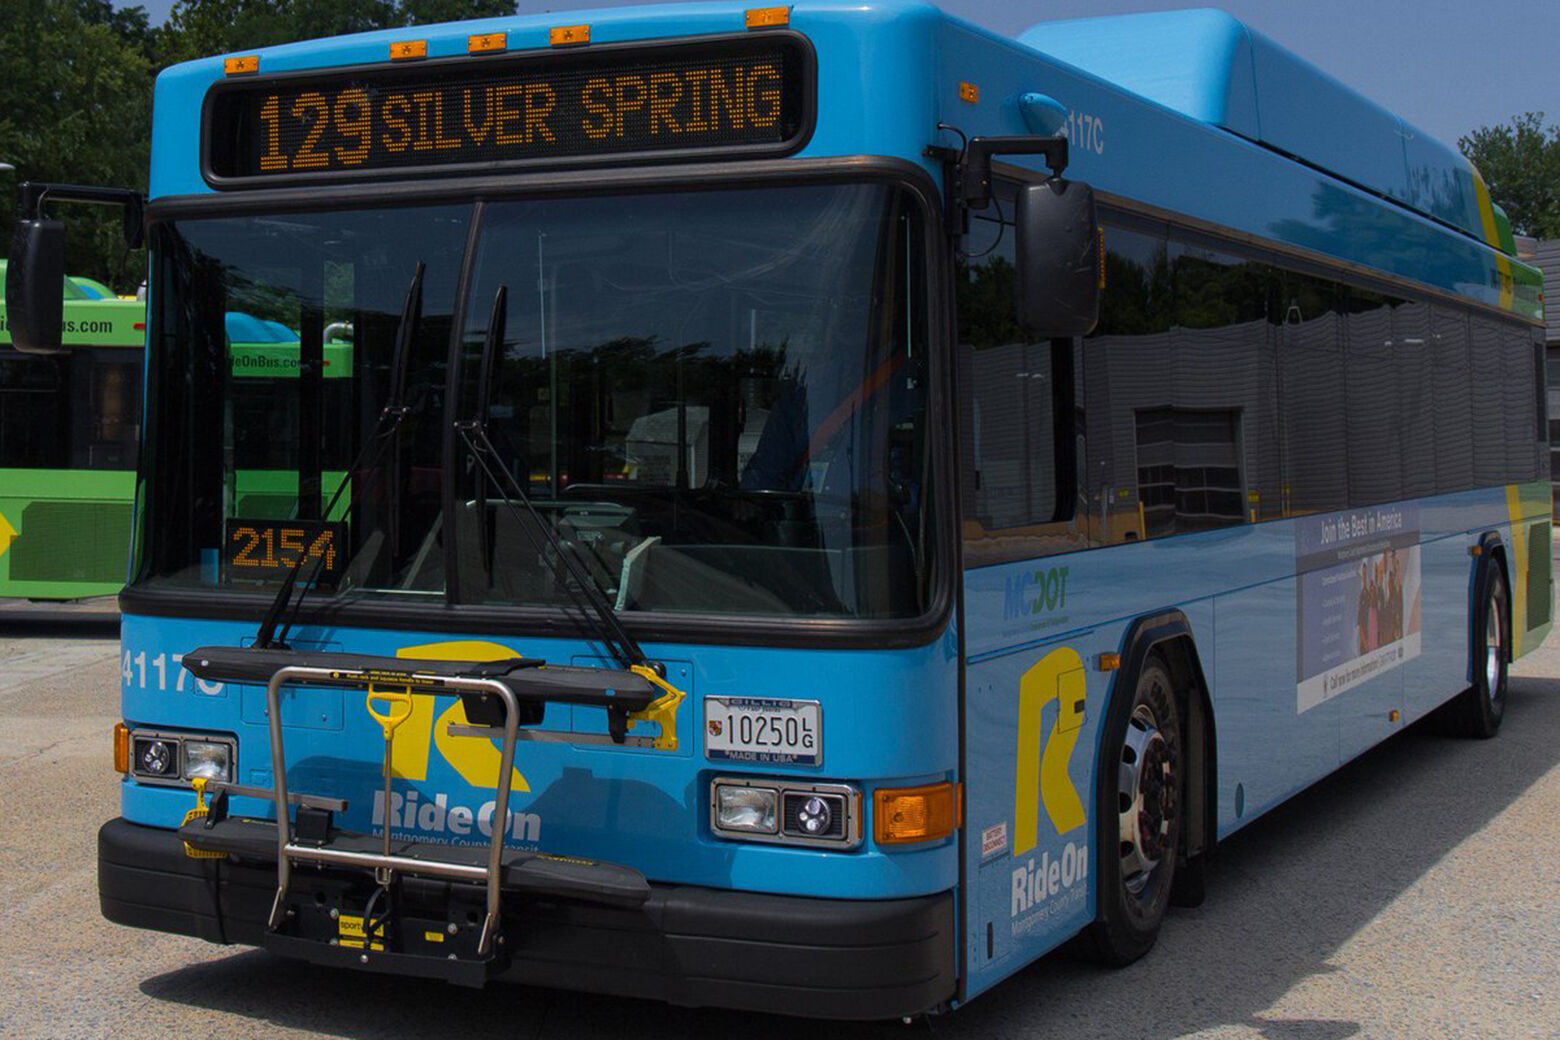 Montgomery Co. Ride On bus service expanding - WTOP